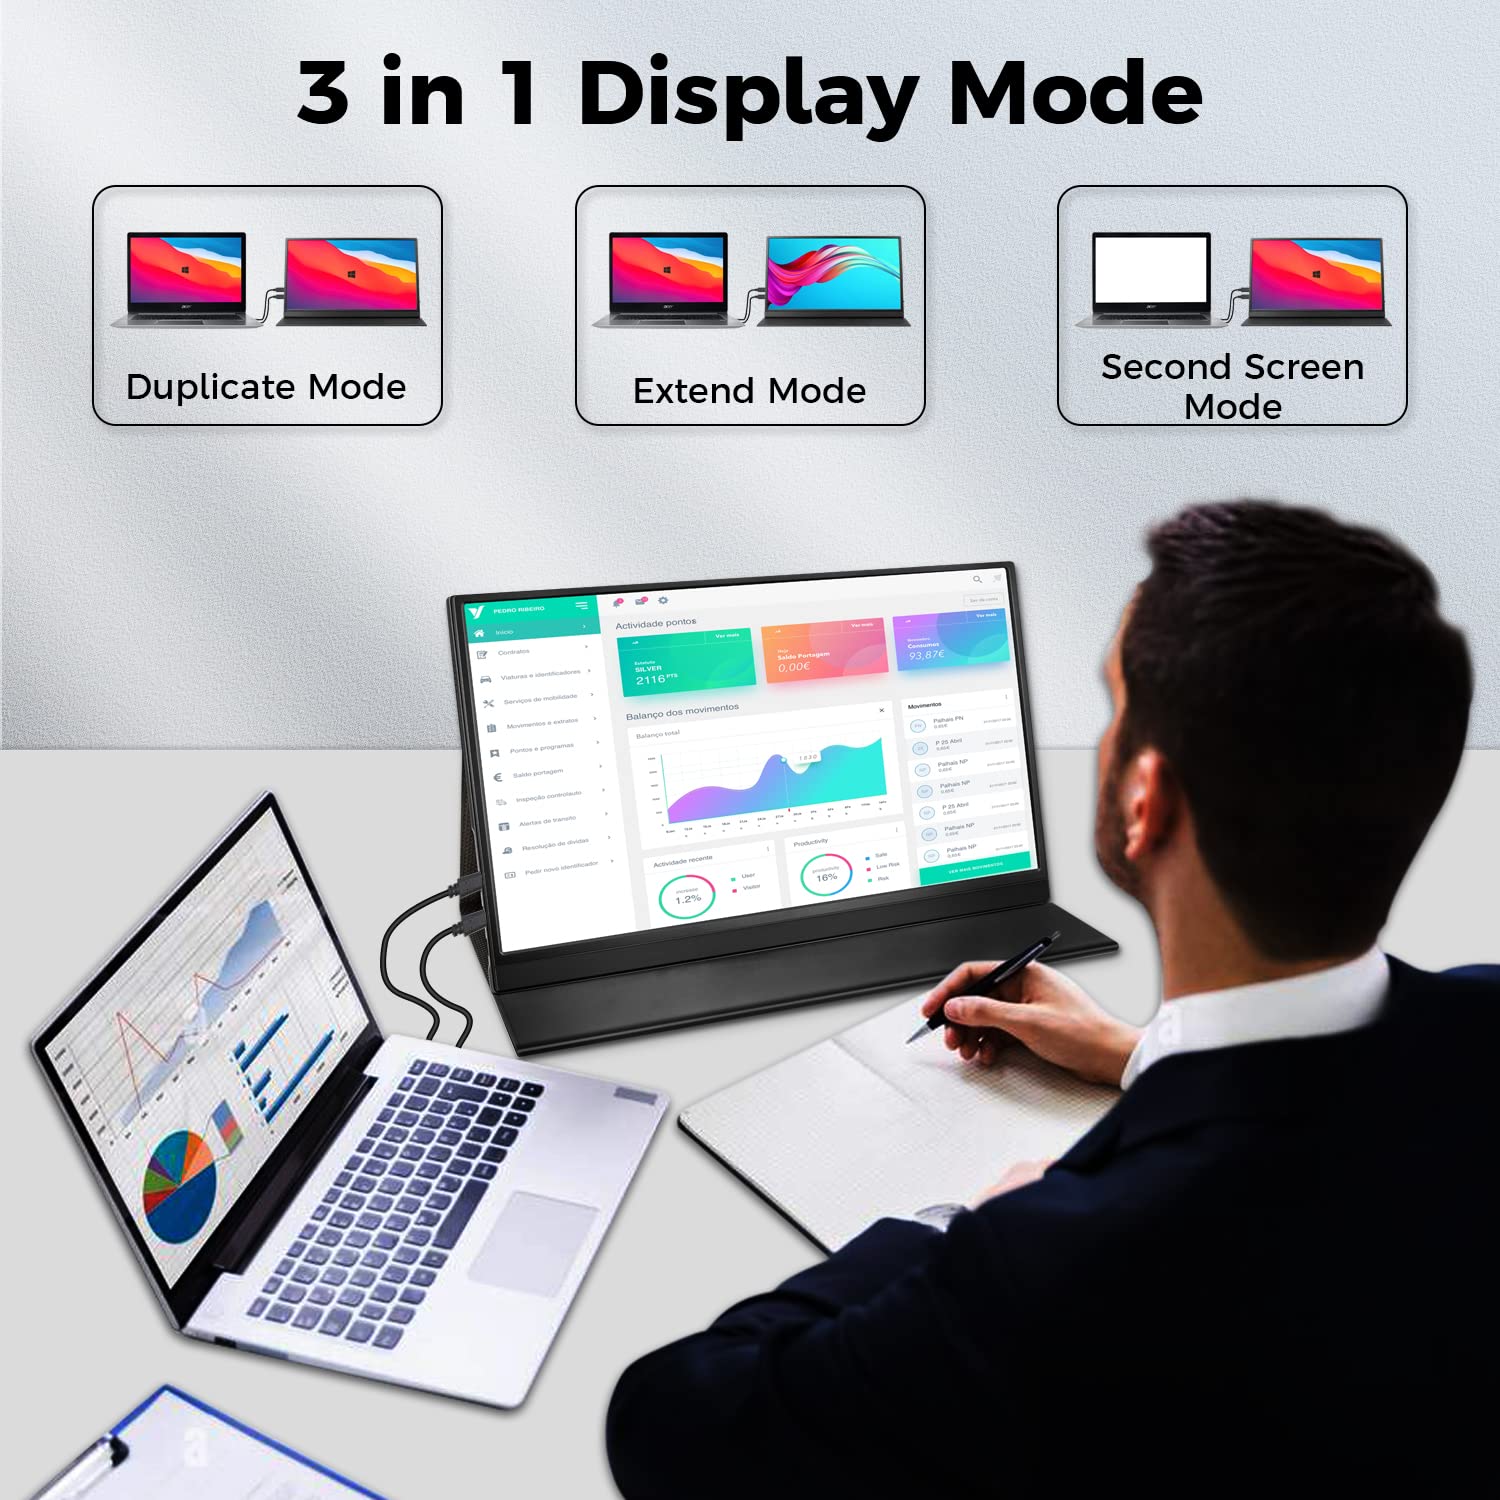 Portable Monitor, 15.6 Inch Laptop Monitor 1920×1080 Full HD USB C HDMI Second External Monitor for Laptop PC Phone PS4/5 Xbox Switch, Built-in Speaker Included Smart Cover & Screen Protector